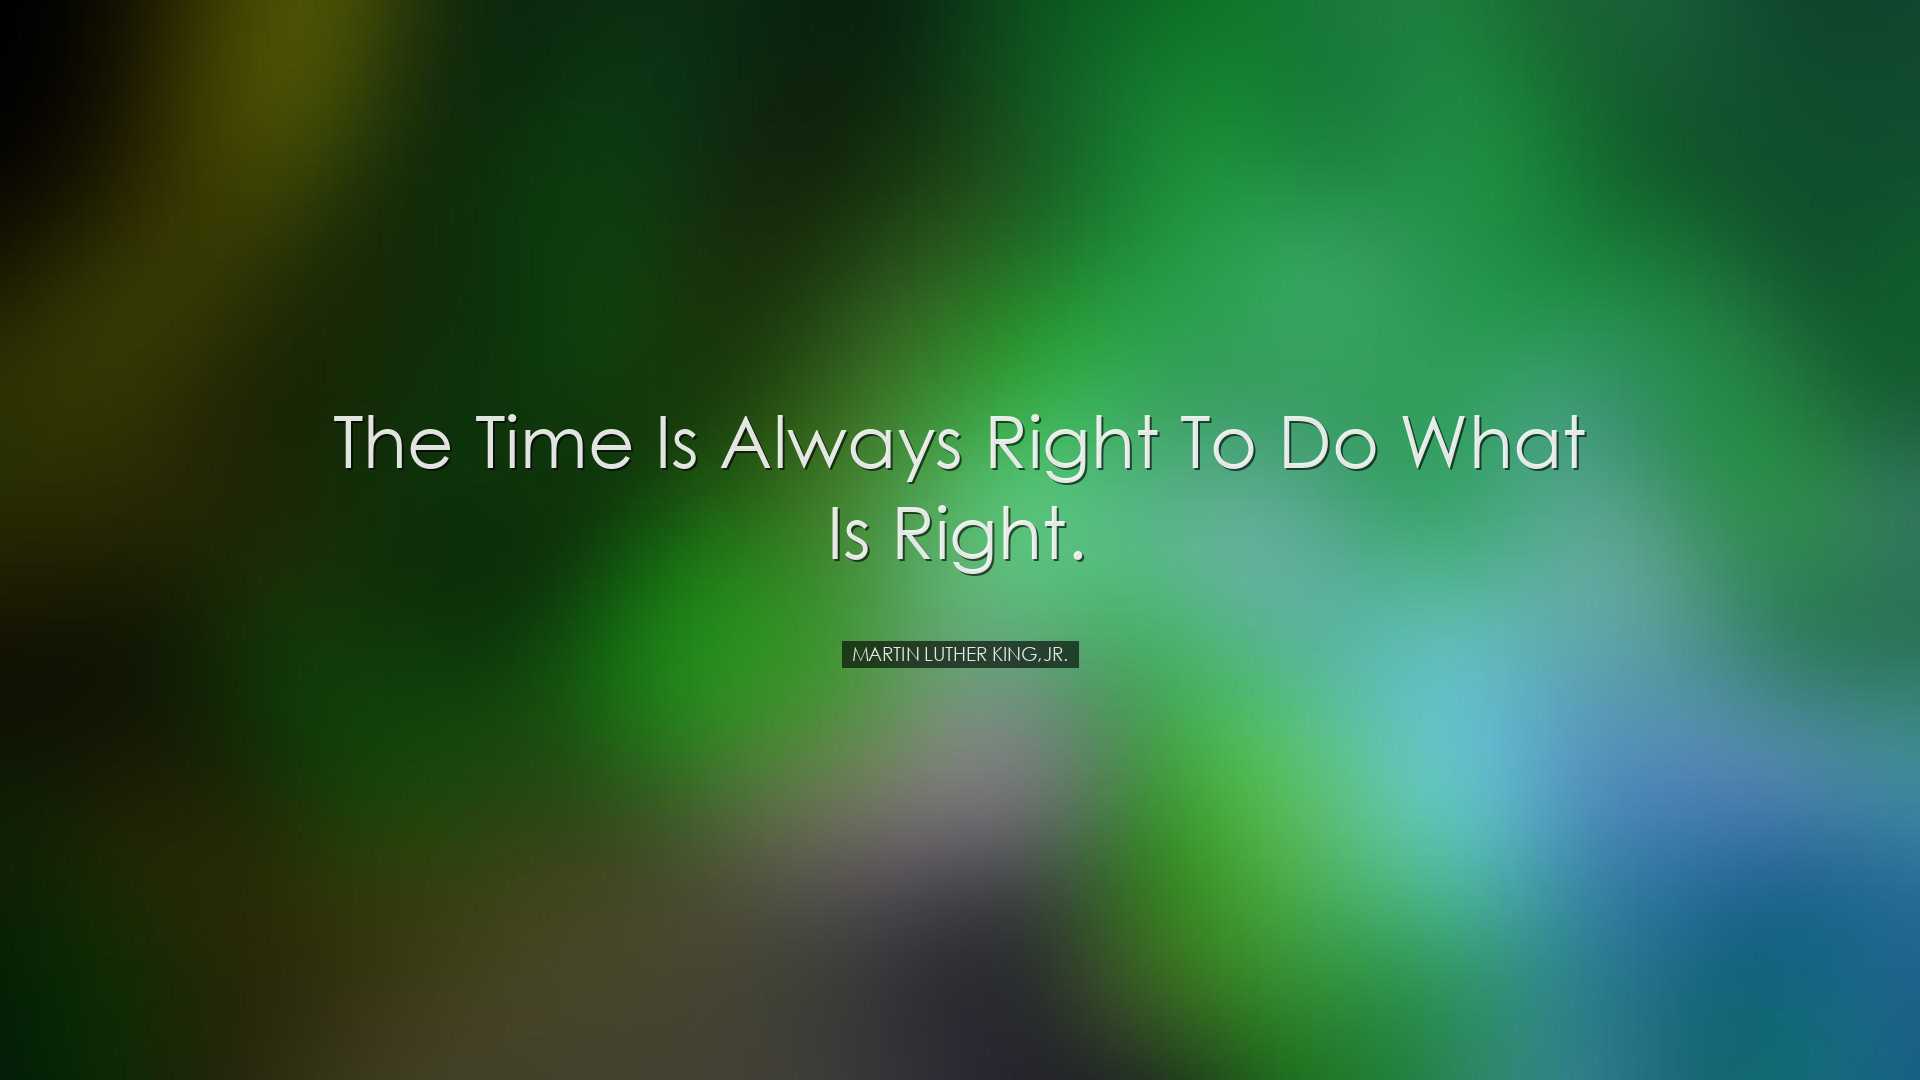 The time is always right to do what is right. - Martin Luther King